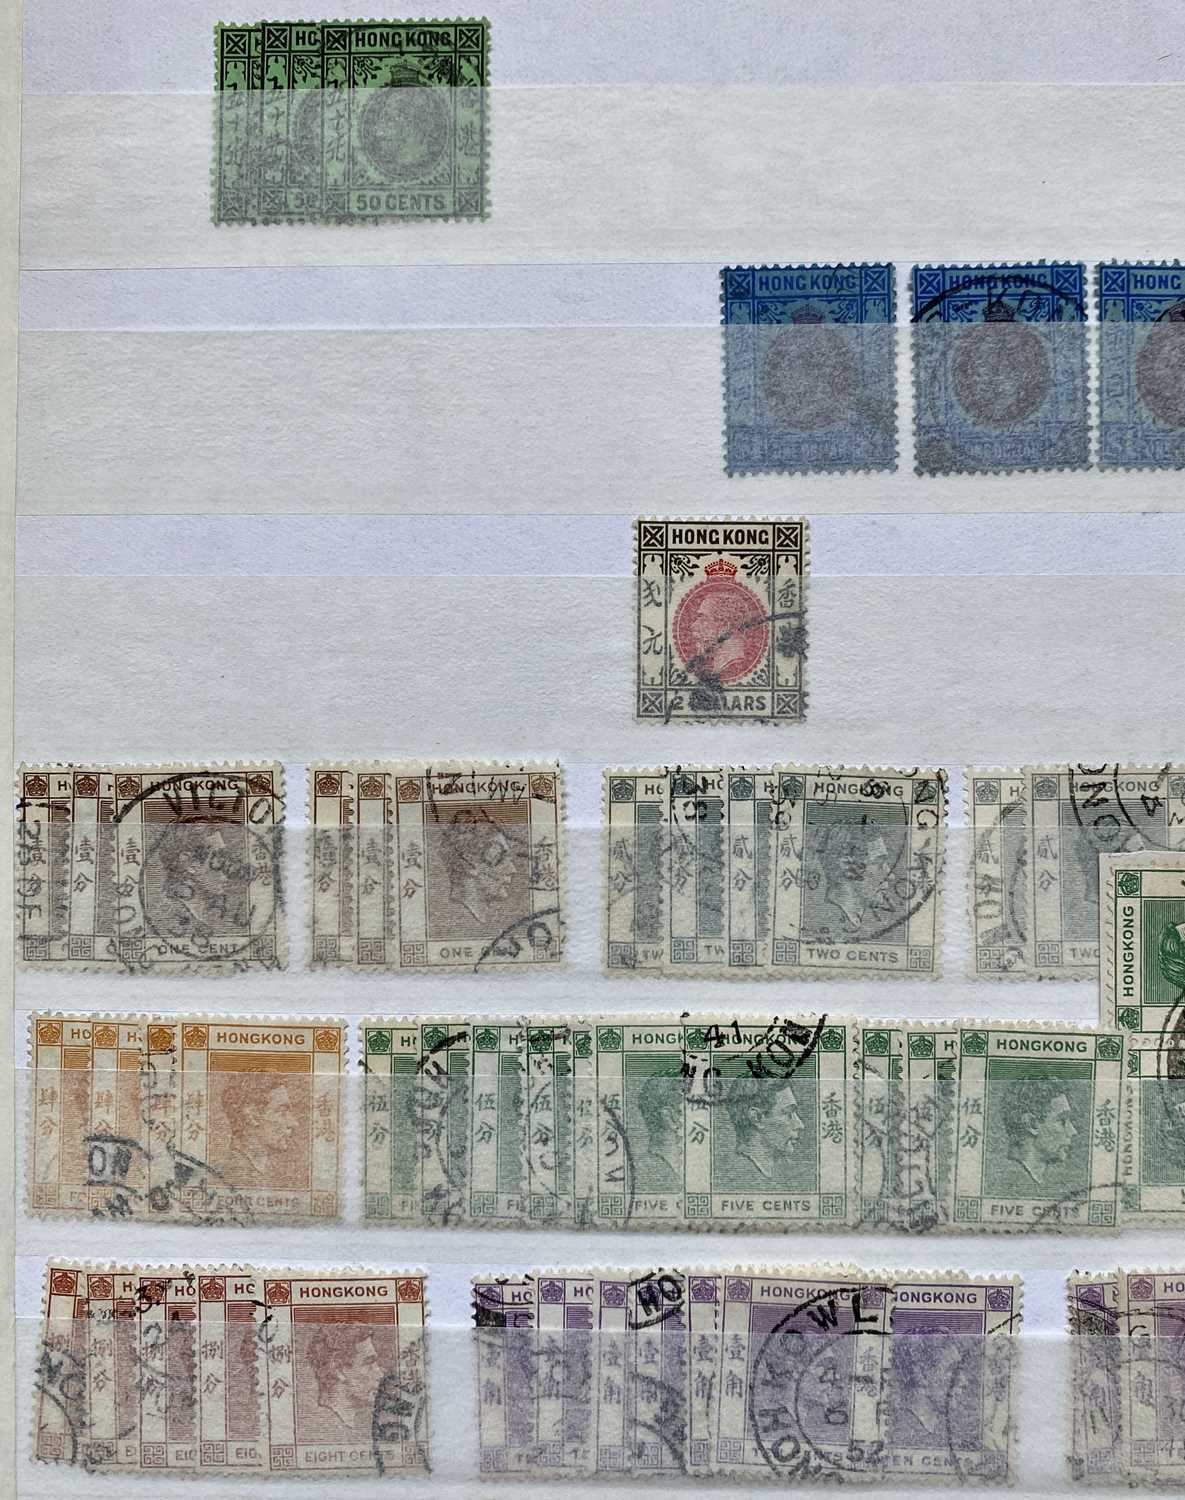 VERY GOOD HONG KONG UNMOUNTED MINT & FINE USED HIGH CAT VALUE, OVERPRINTS ETC - Image 18 of 19